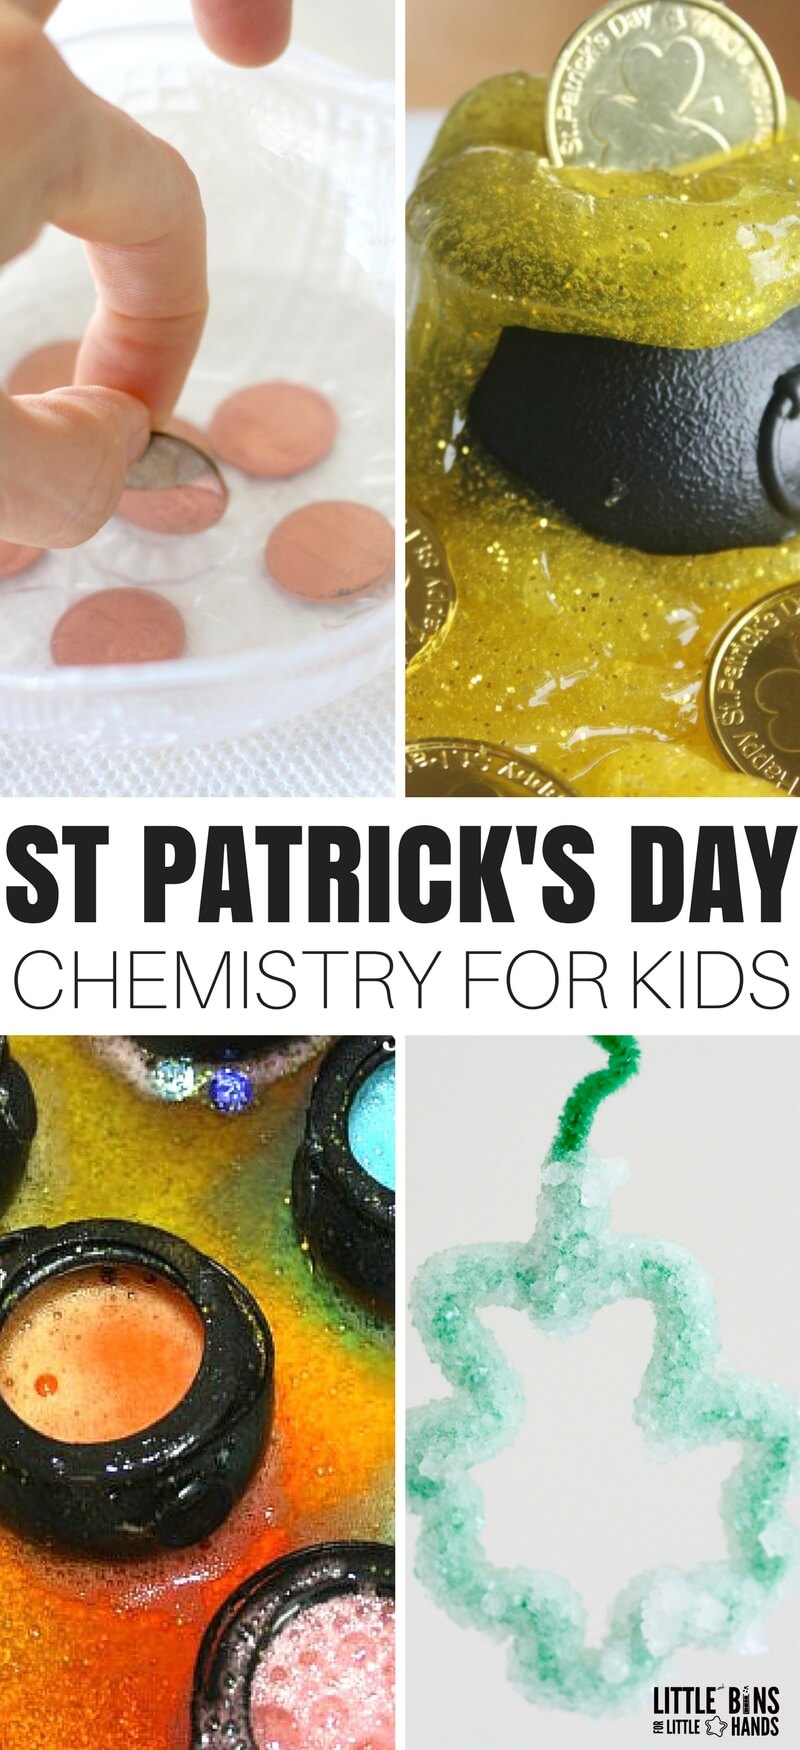 The best St Patricks Day chemistry experiments for St Patricks Day science activities. Make homemade slime recipes, explore chemical reactions, grow crystals, examine dissolving candy and more! Fun St Patricks Day activities for the whole family to enjoy.